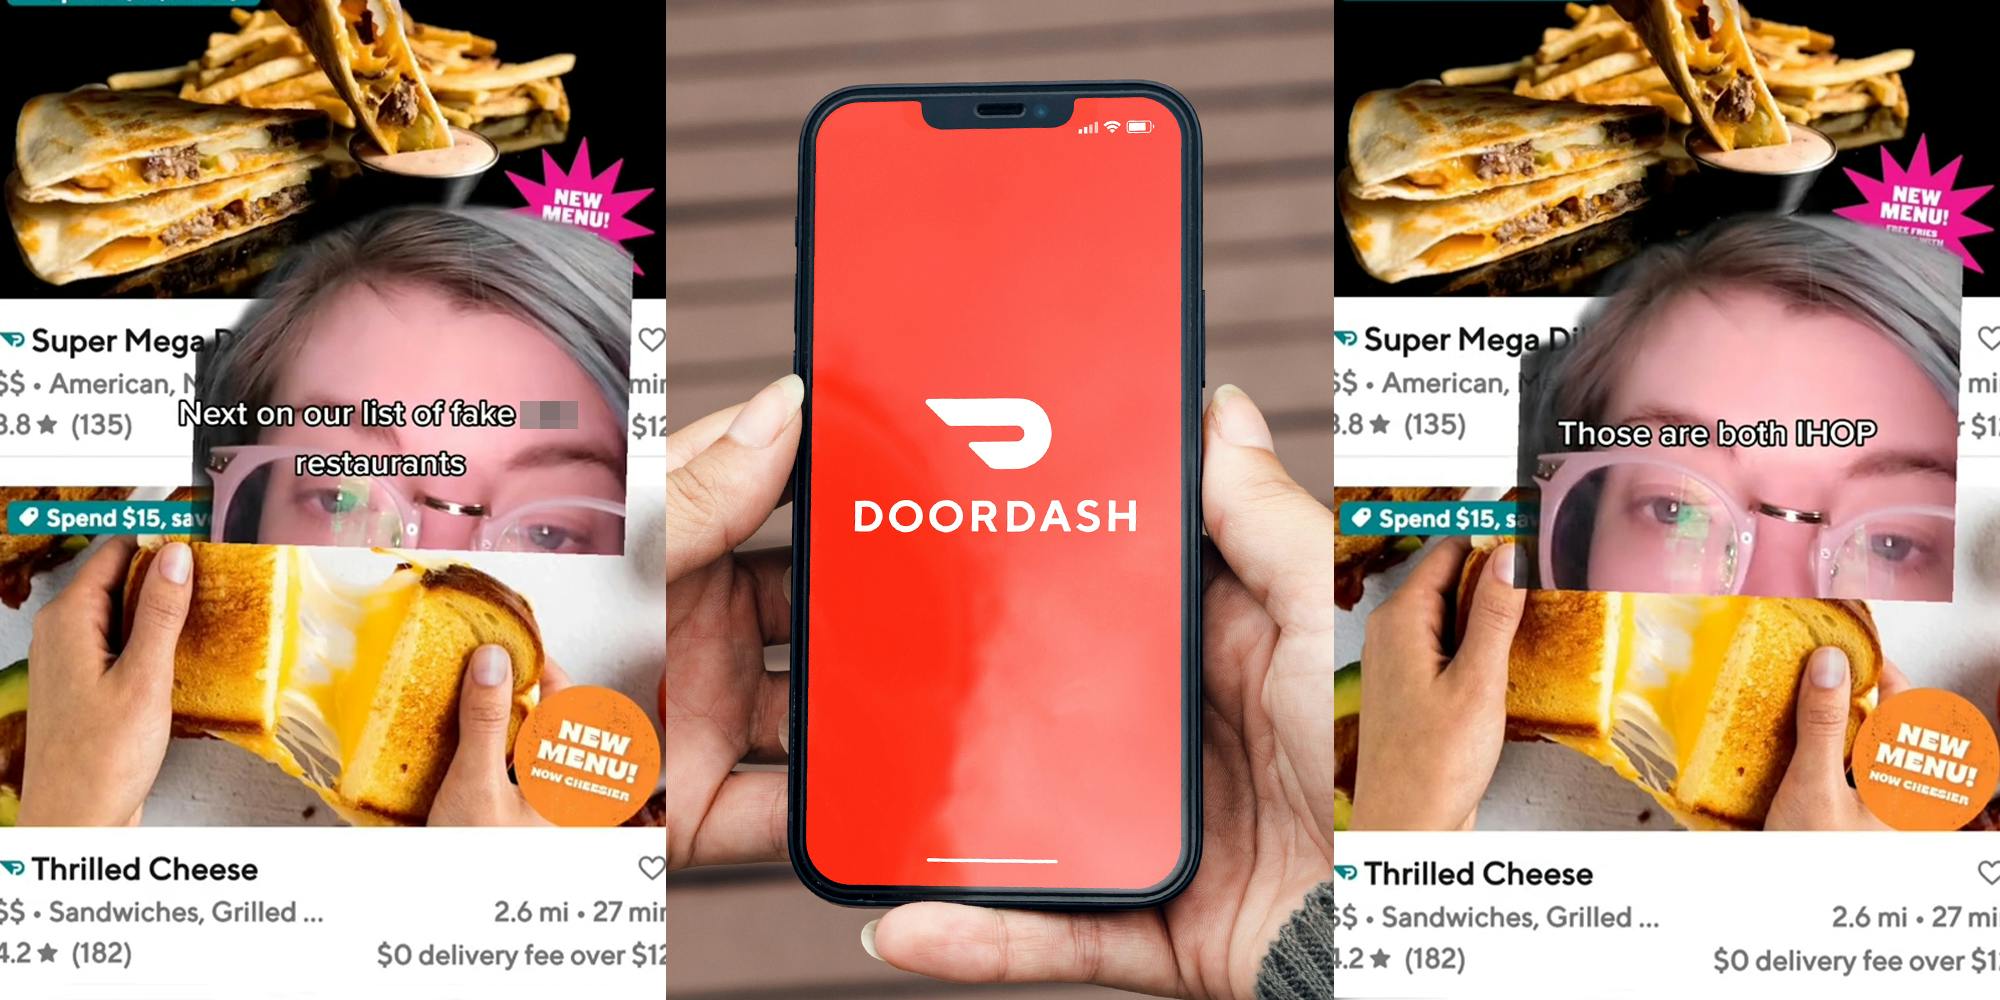 person greenscreen TikTok over DoorDash listings with caption "Next on our list of fake blank restaurants" (l) DoorDash on phone in hands in front of wooden background (c) person greenscreen TikTok over DoorDash listings with caption "Those are both IHOP" (r)